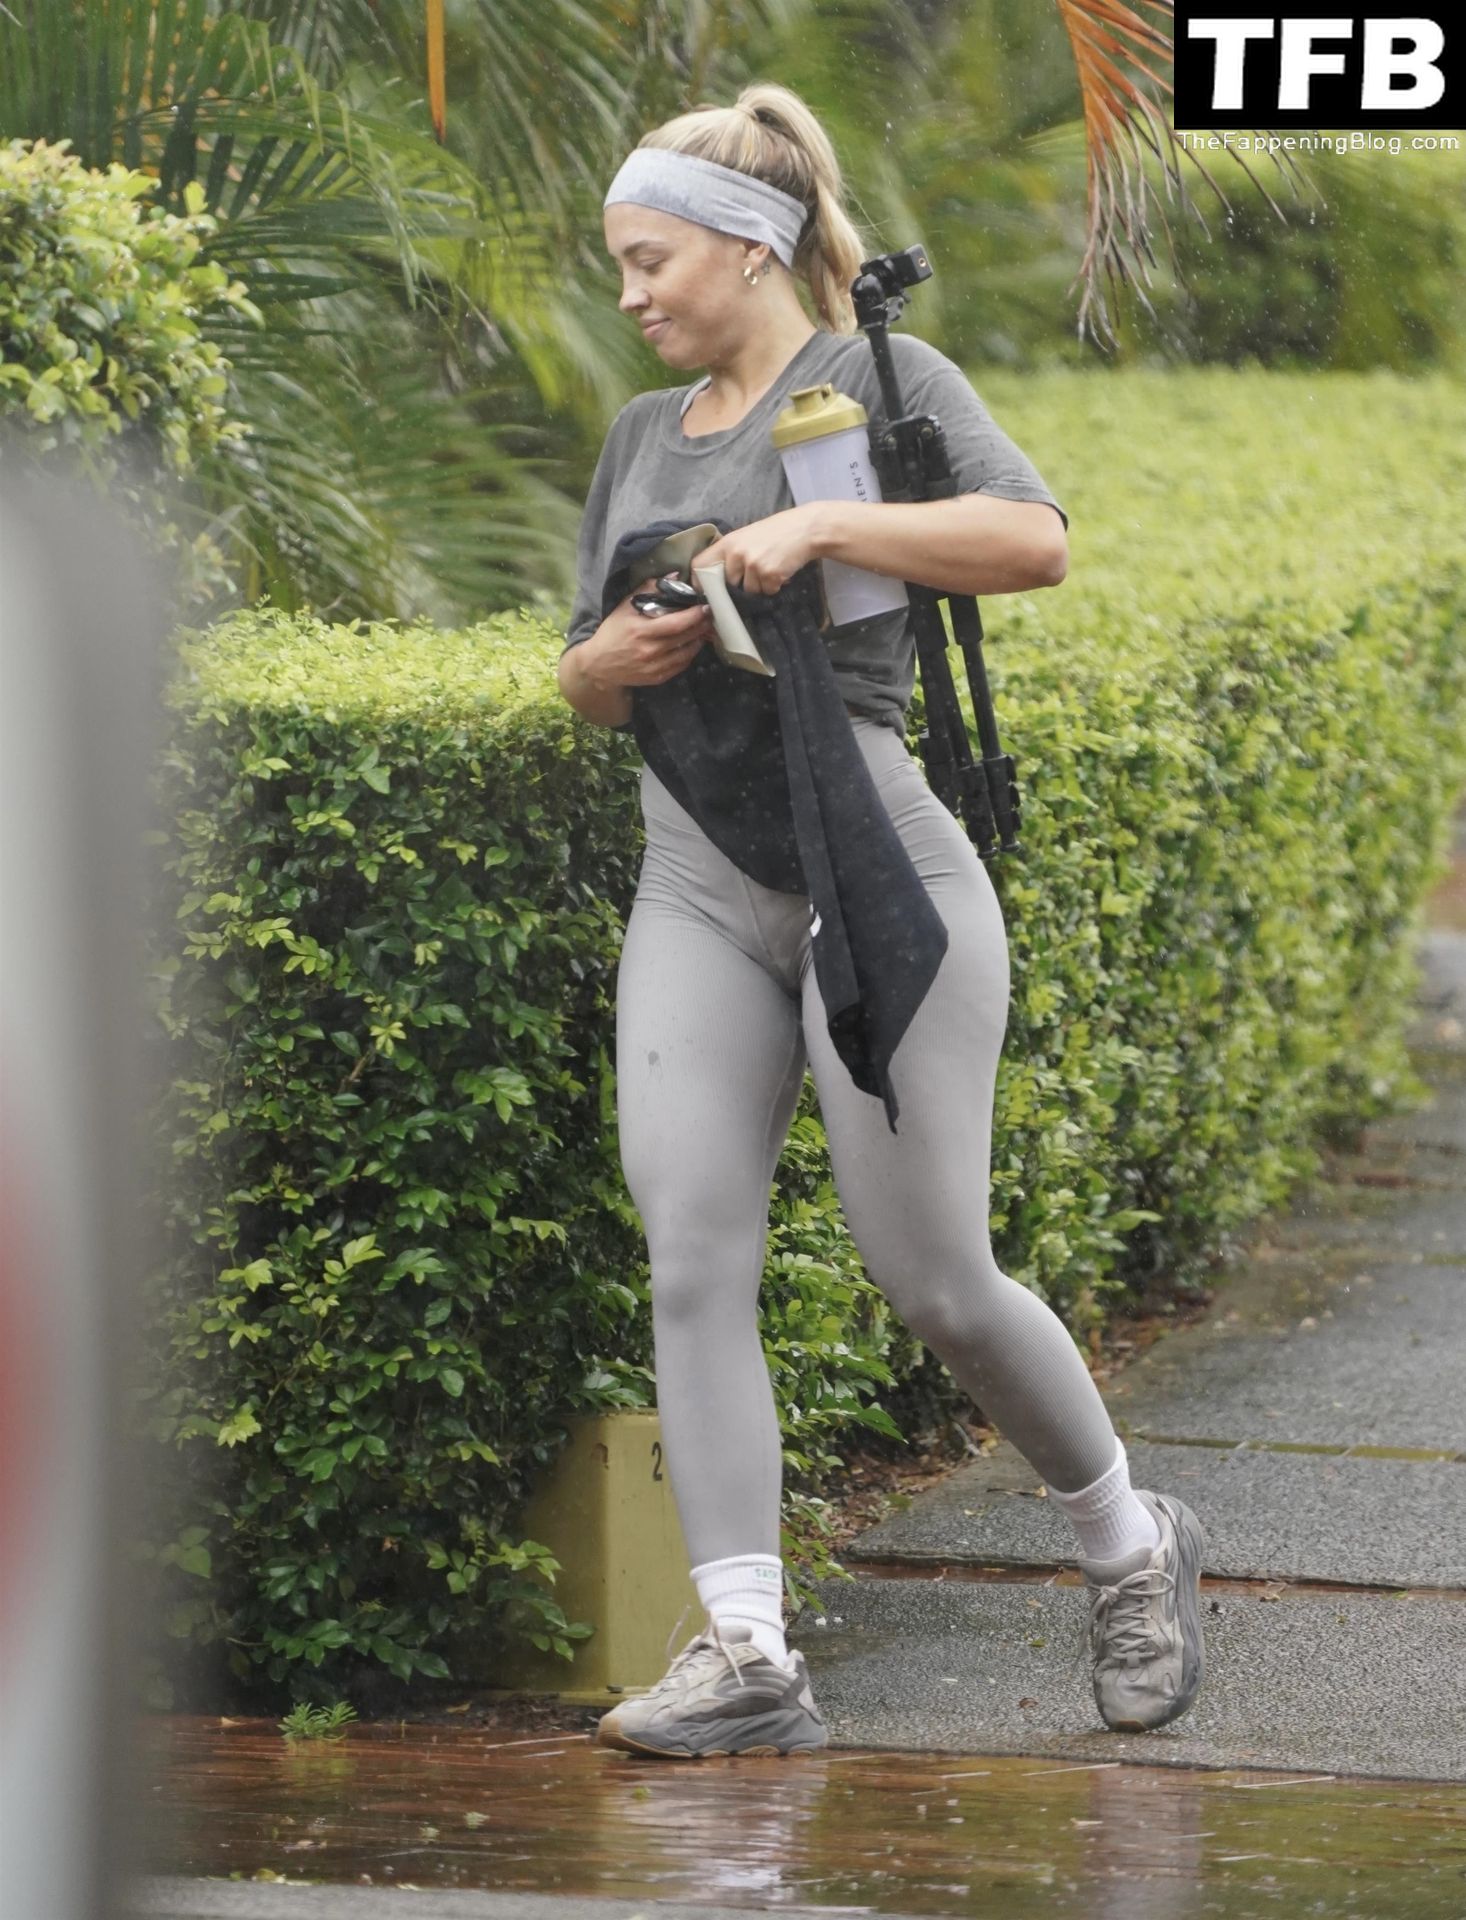 Newly-engaged-Tammy-Hembrow-leaves-the-gym-without-her-engagement-ring-on-during-a-rainy-day-in-Brisbane-The-Fappening-Blog-13.jpg